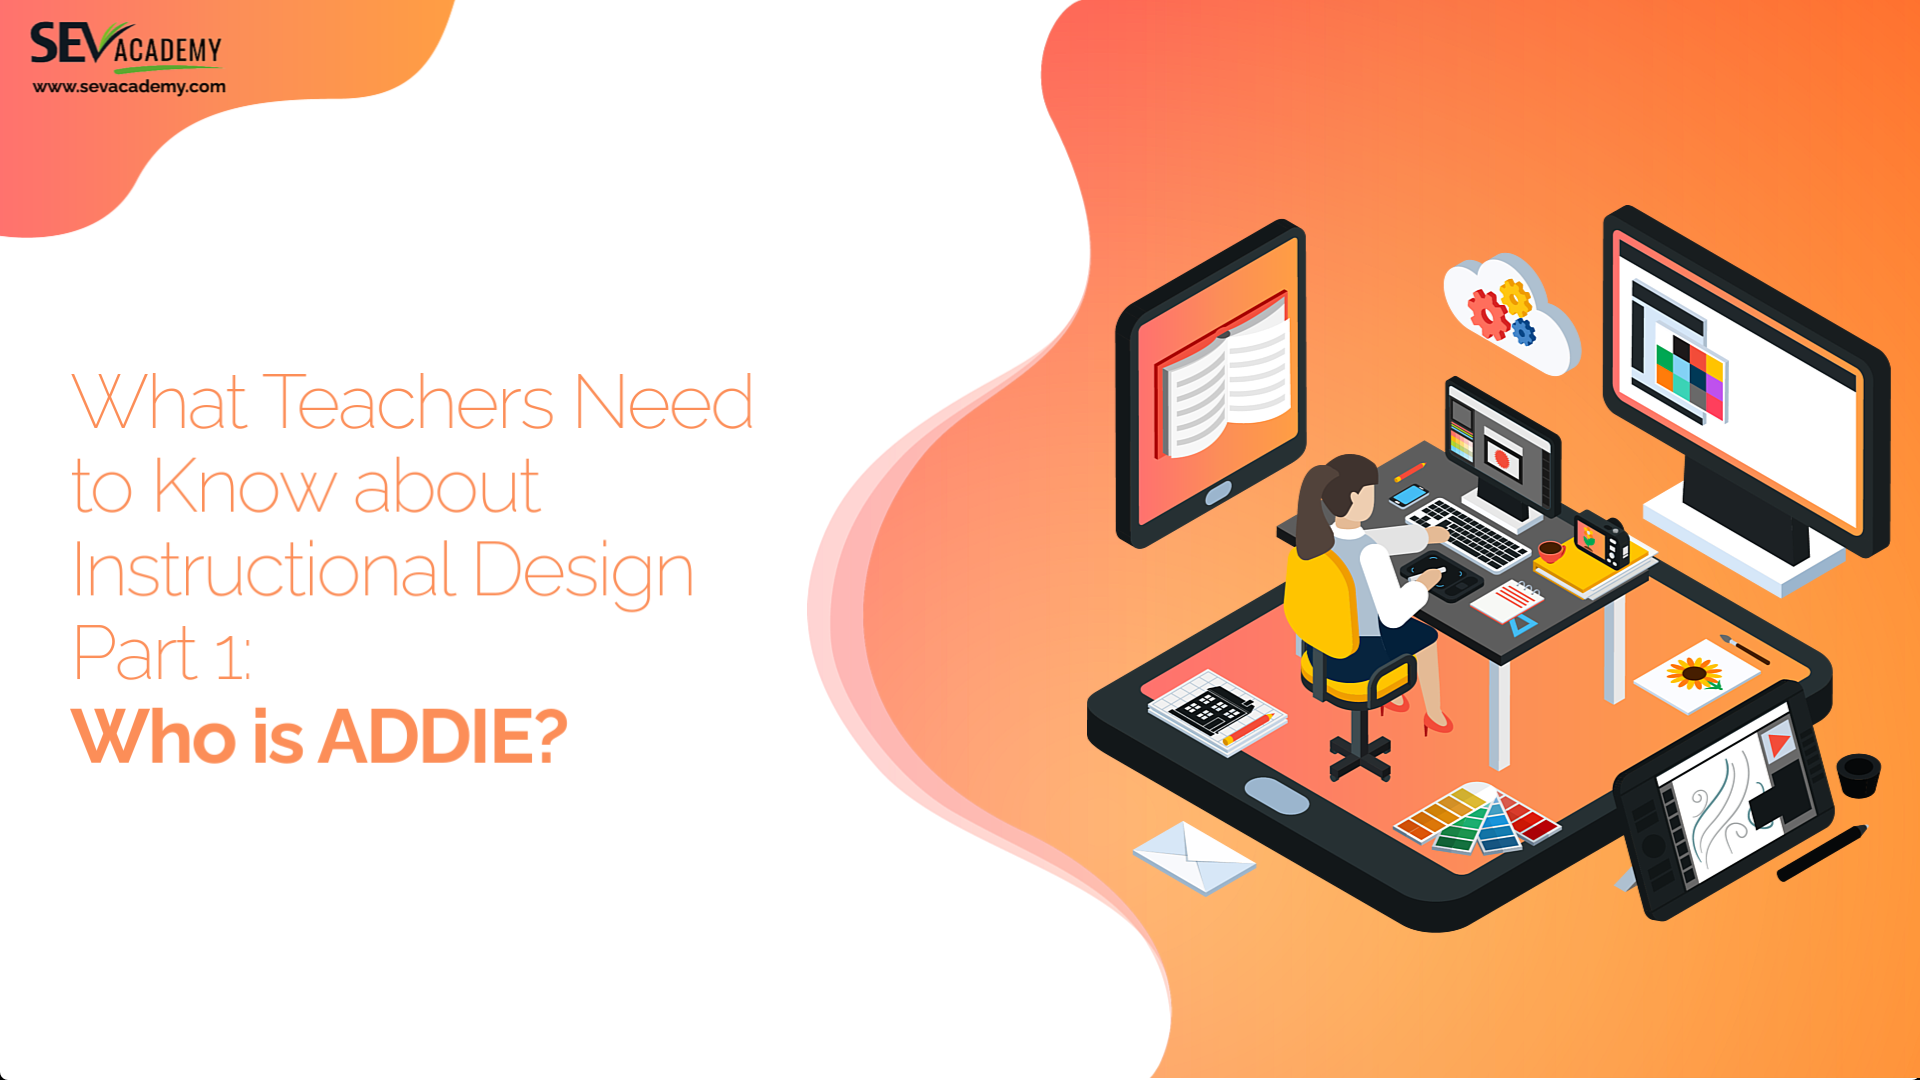 What Teachers Need to Know about Instructional Design Part 1: Who is ADDIE?